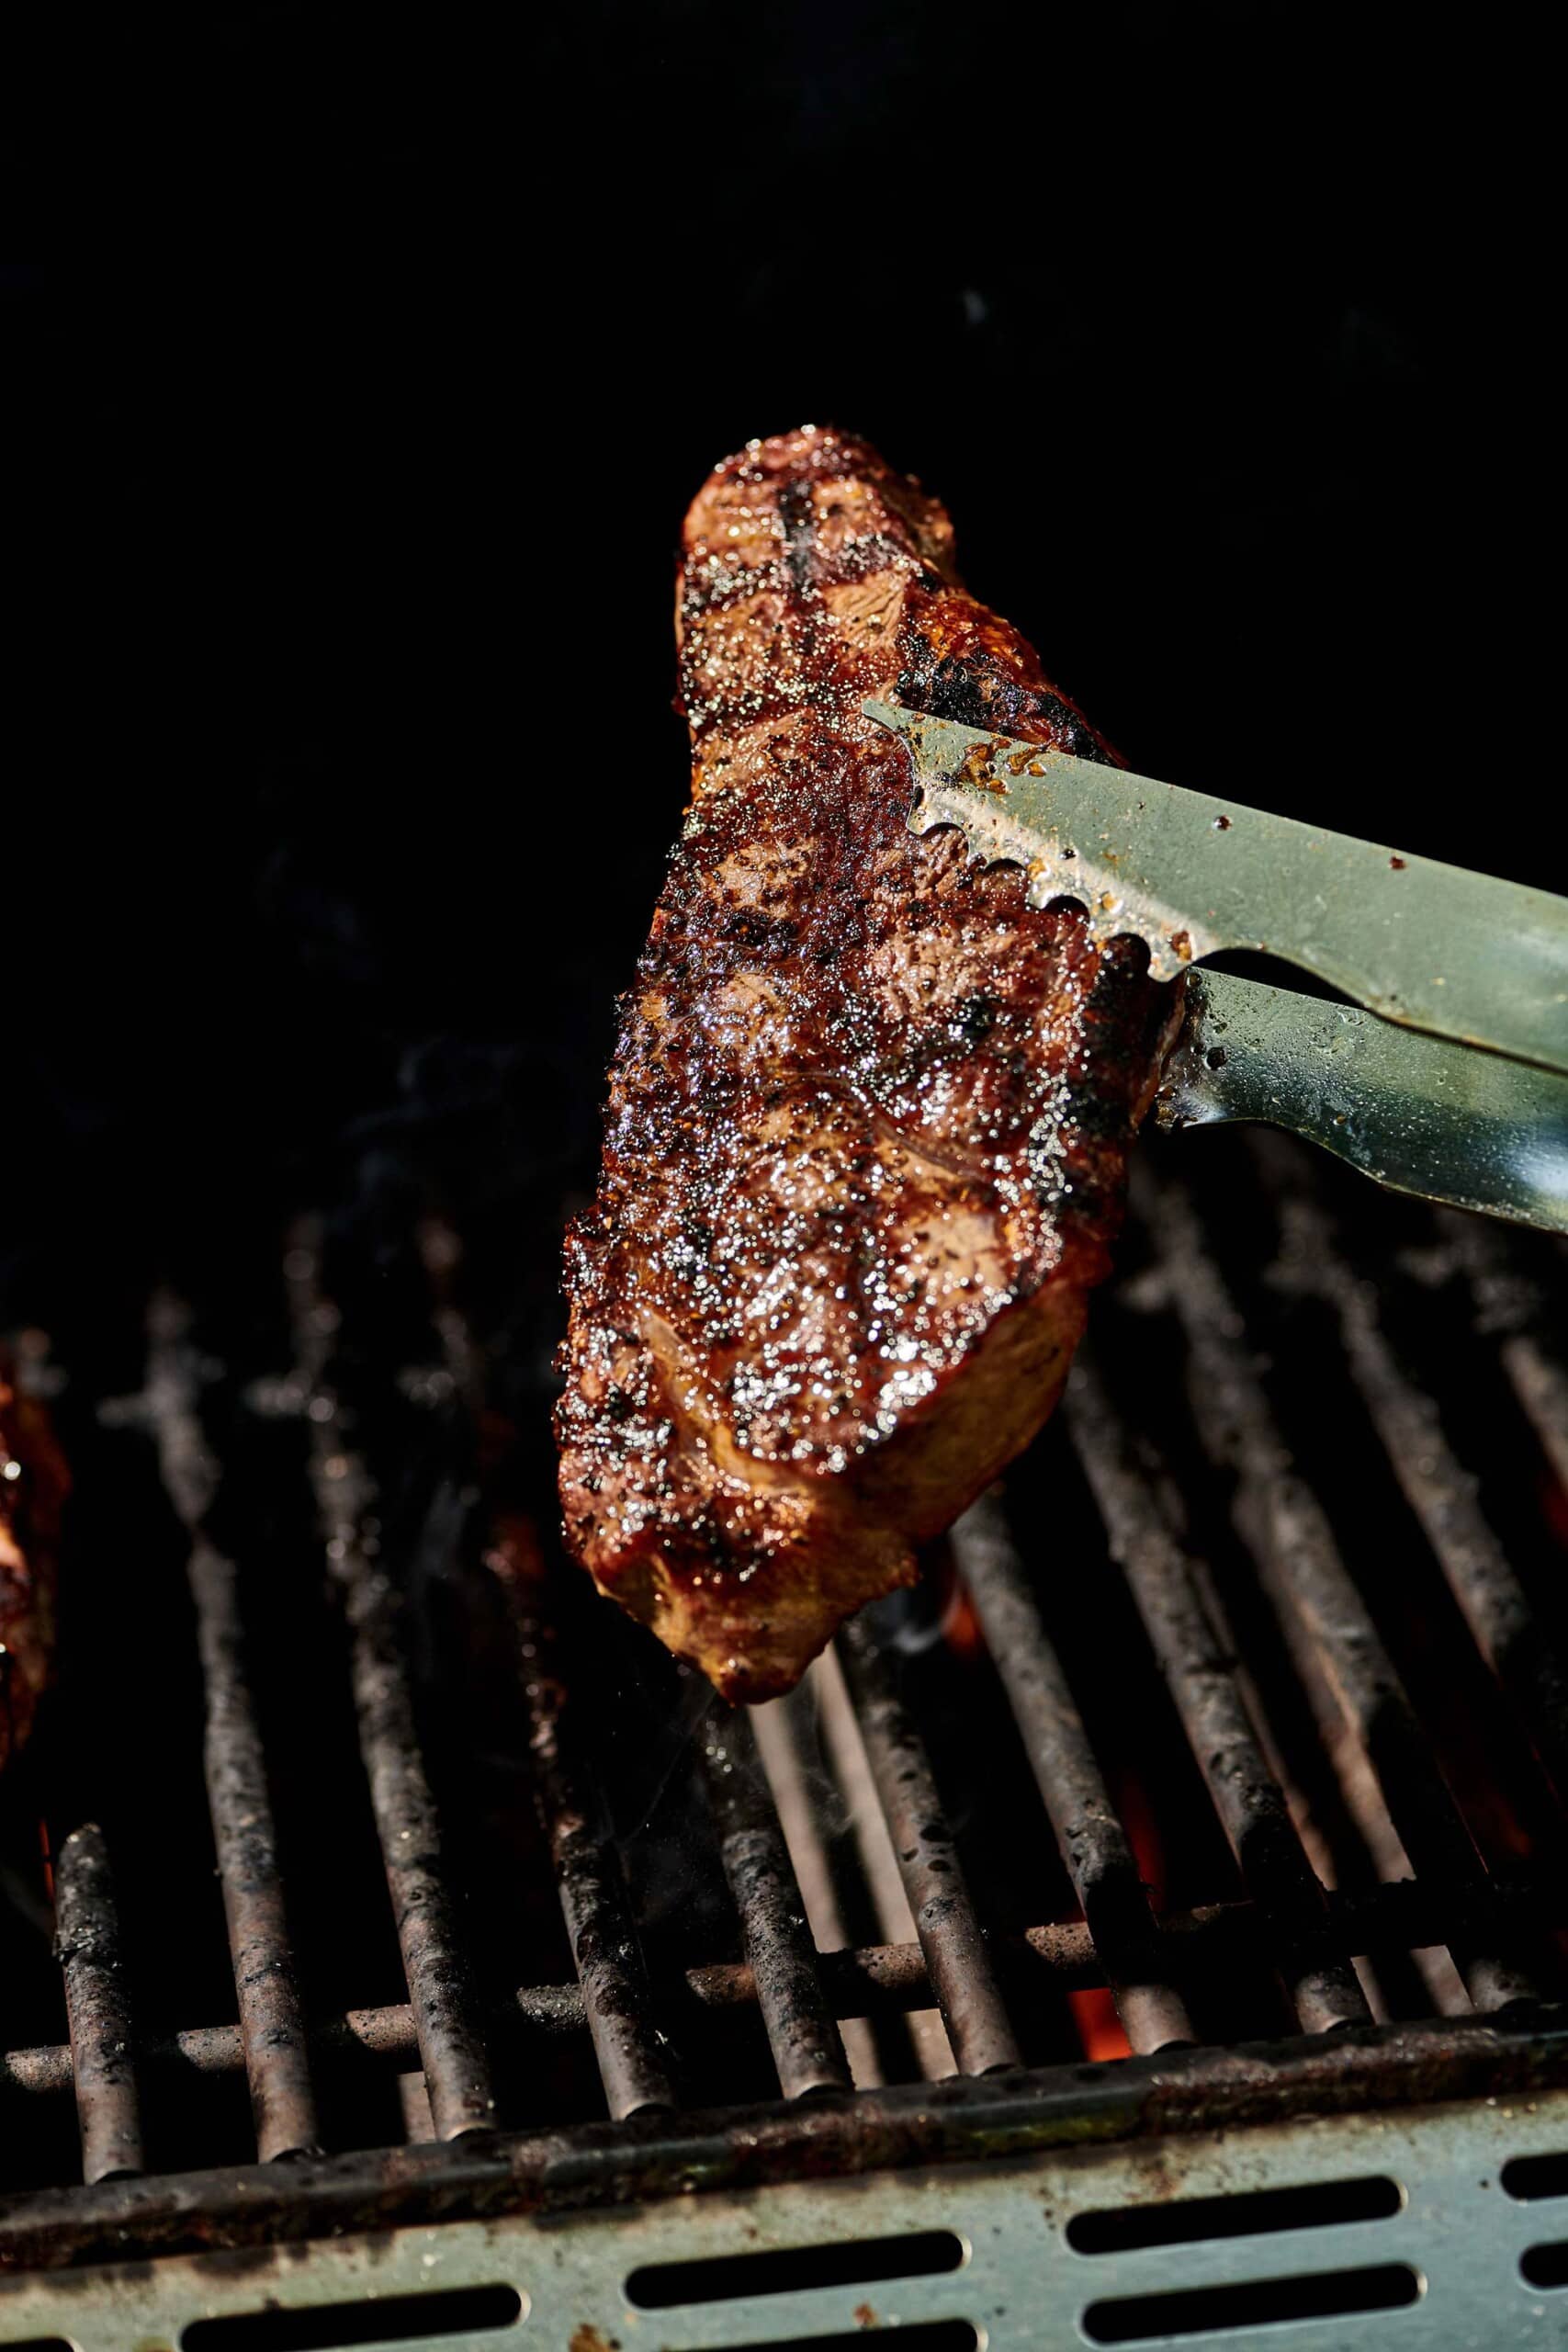 Tongs holding grilled New York strip steak over grill.